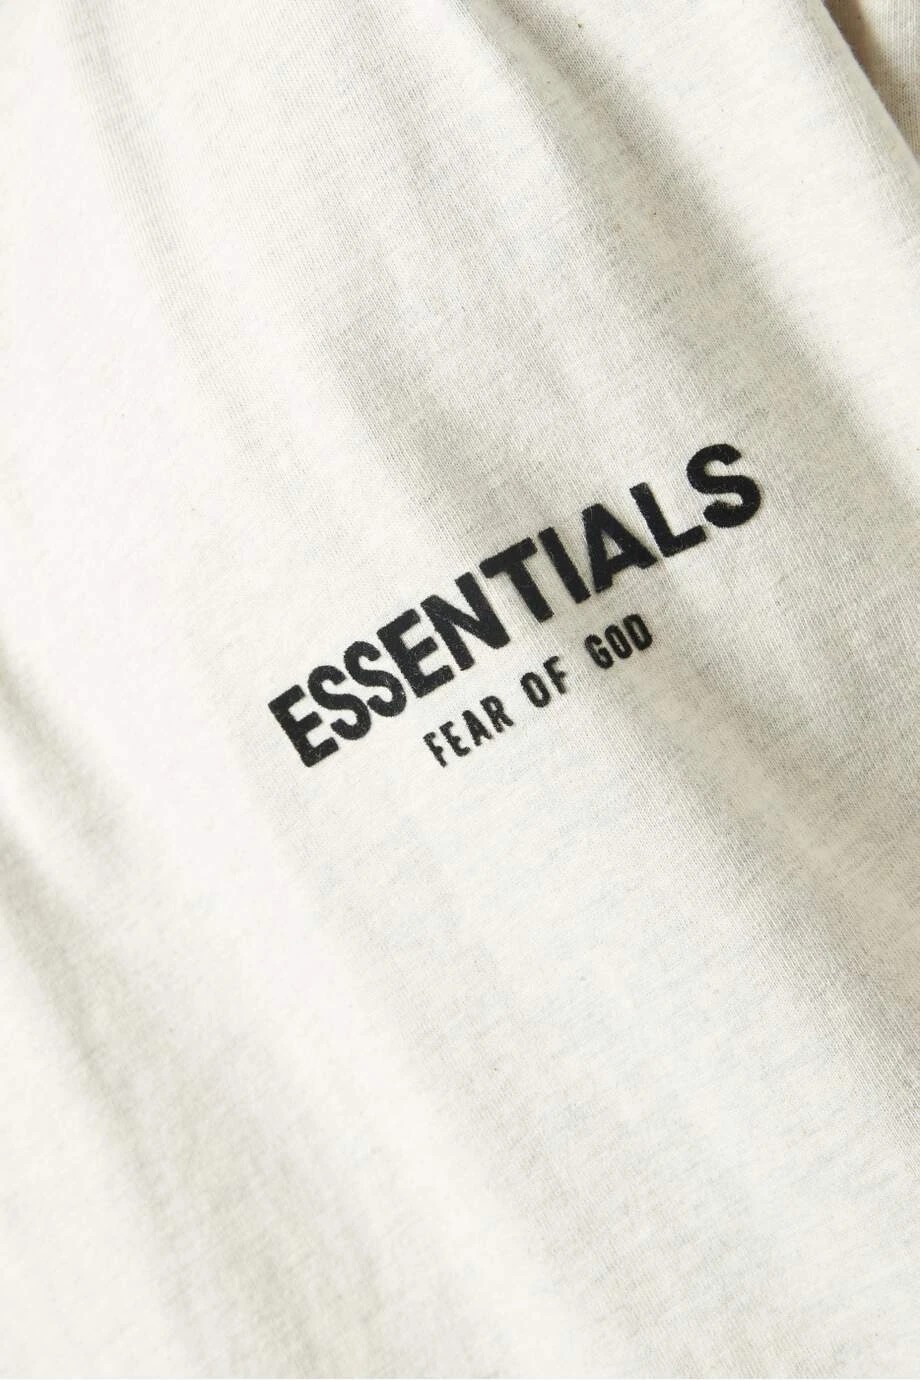 Fear Of God Essentials Oat Meal Tee